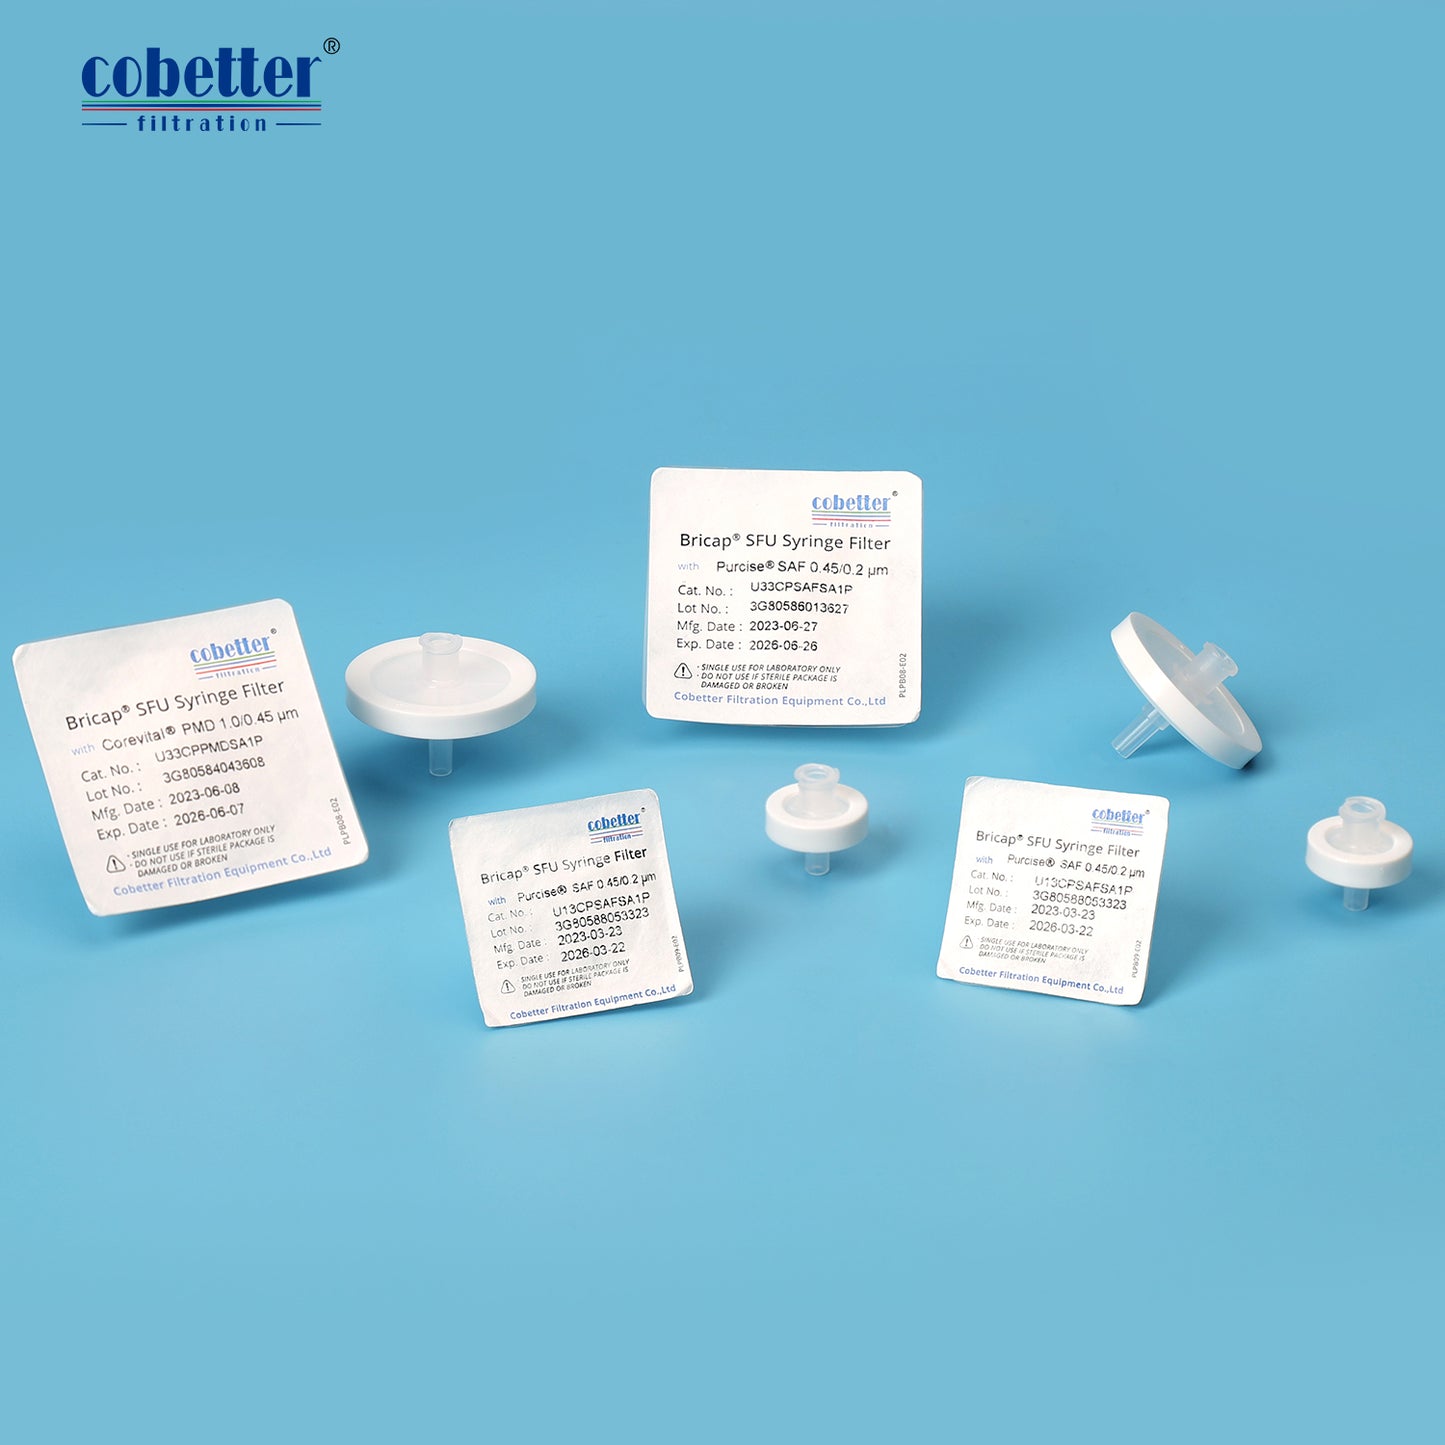 COBETTER High Flux Hydrophilic PVDF Syringe Filters, Prefilter, Autoclavable, Individually Packed 100pcs/pk